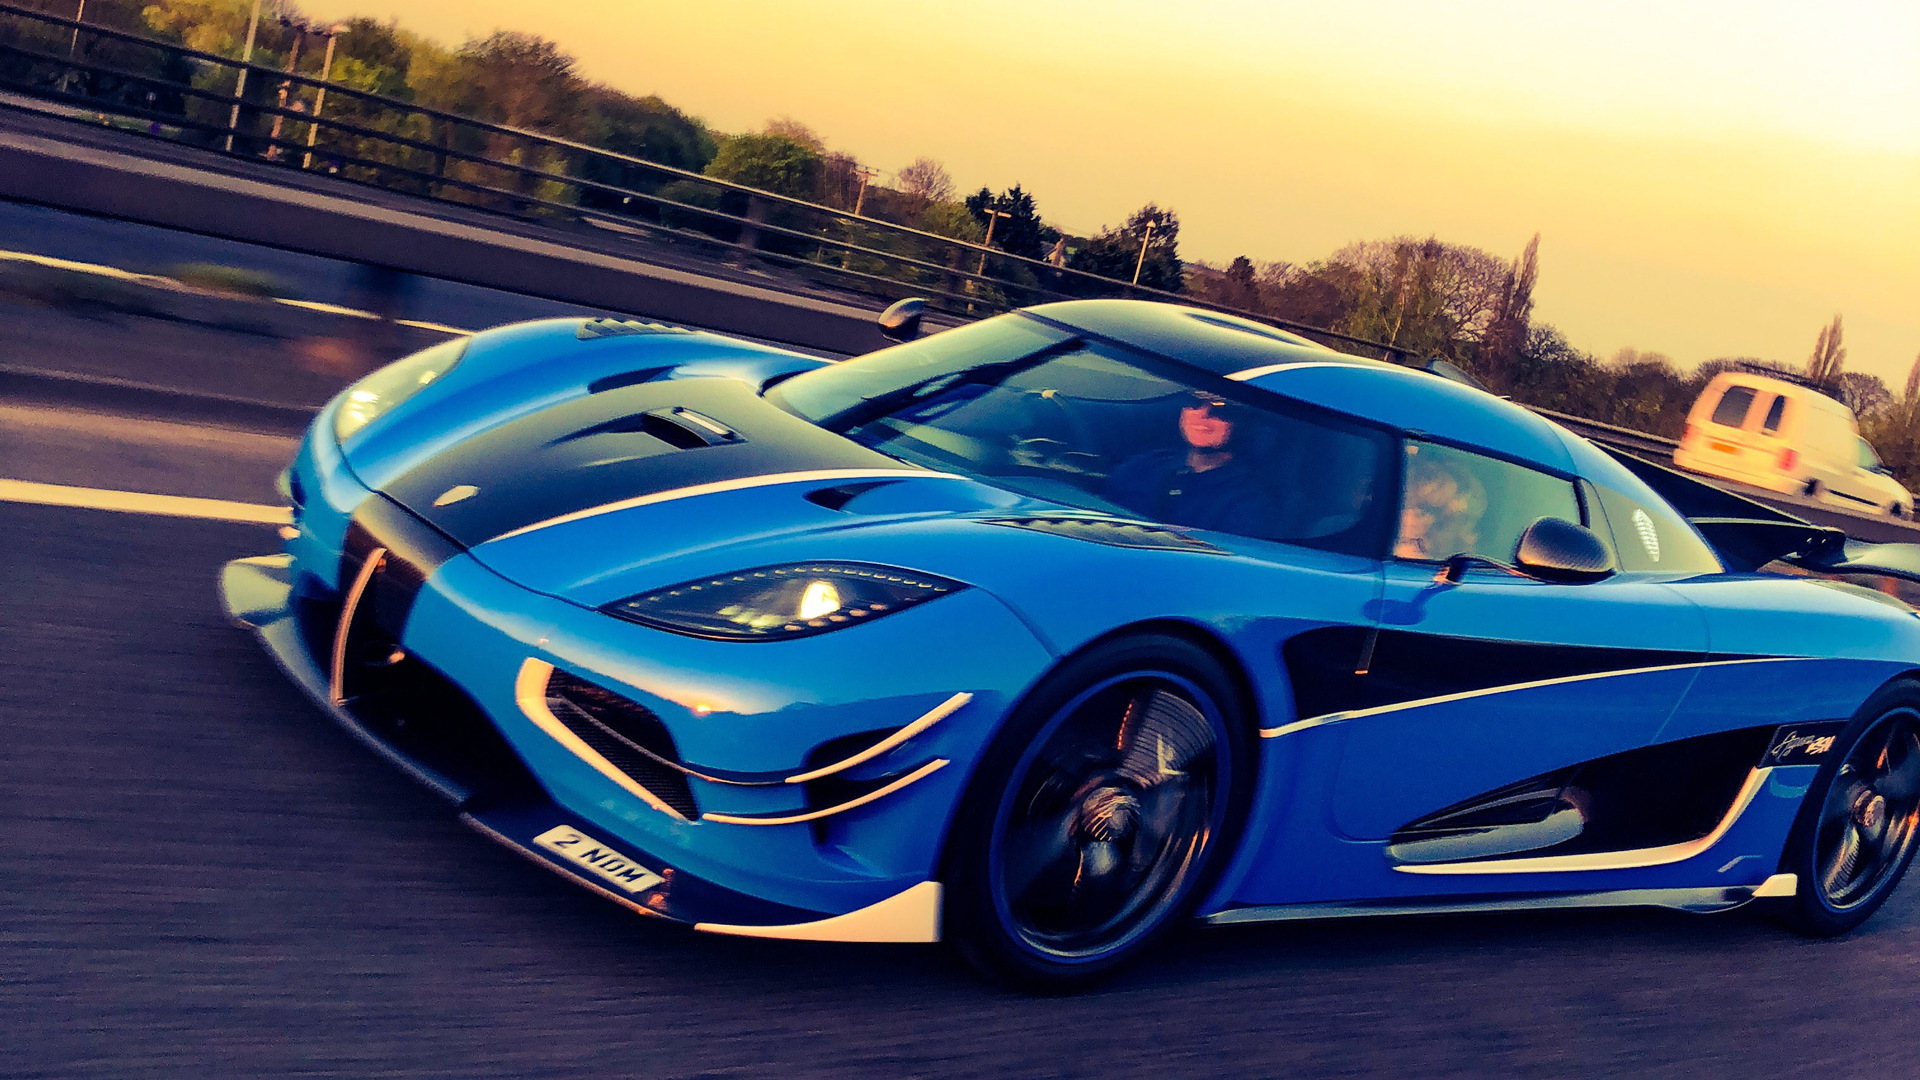 Final Koenigsegg Agera RS during Vmax200 event in April, 2018